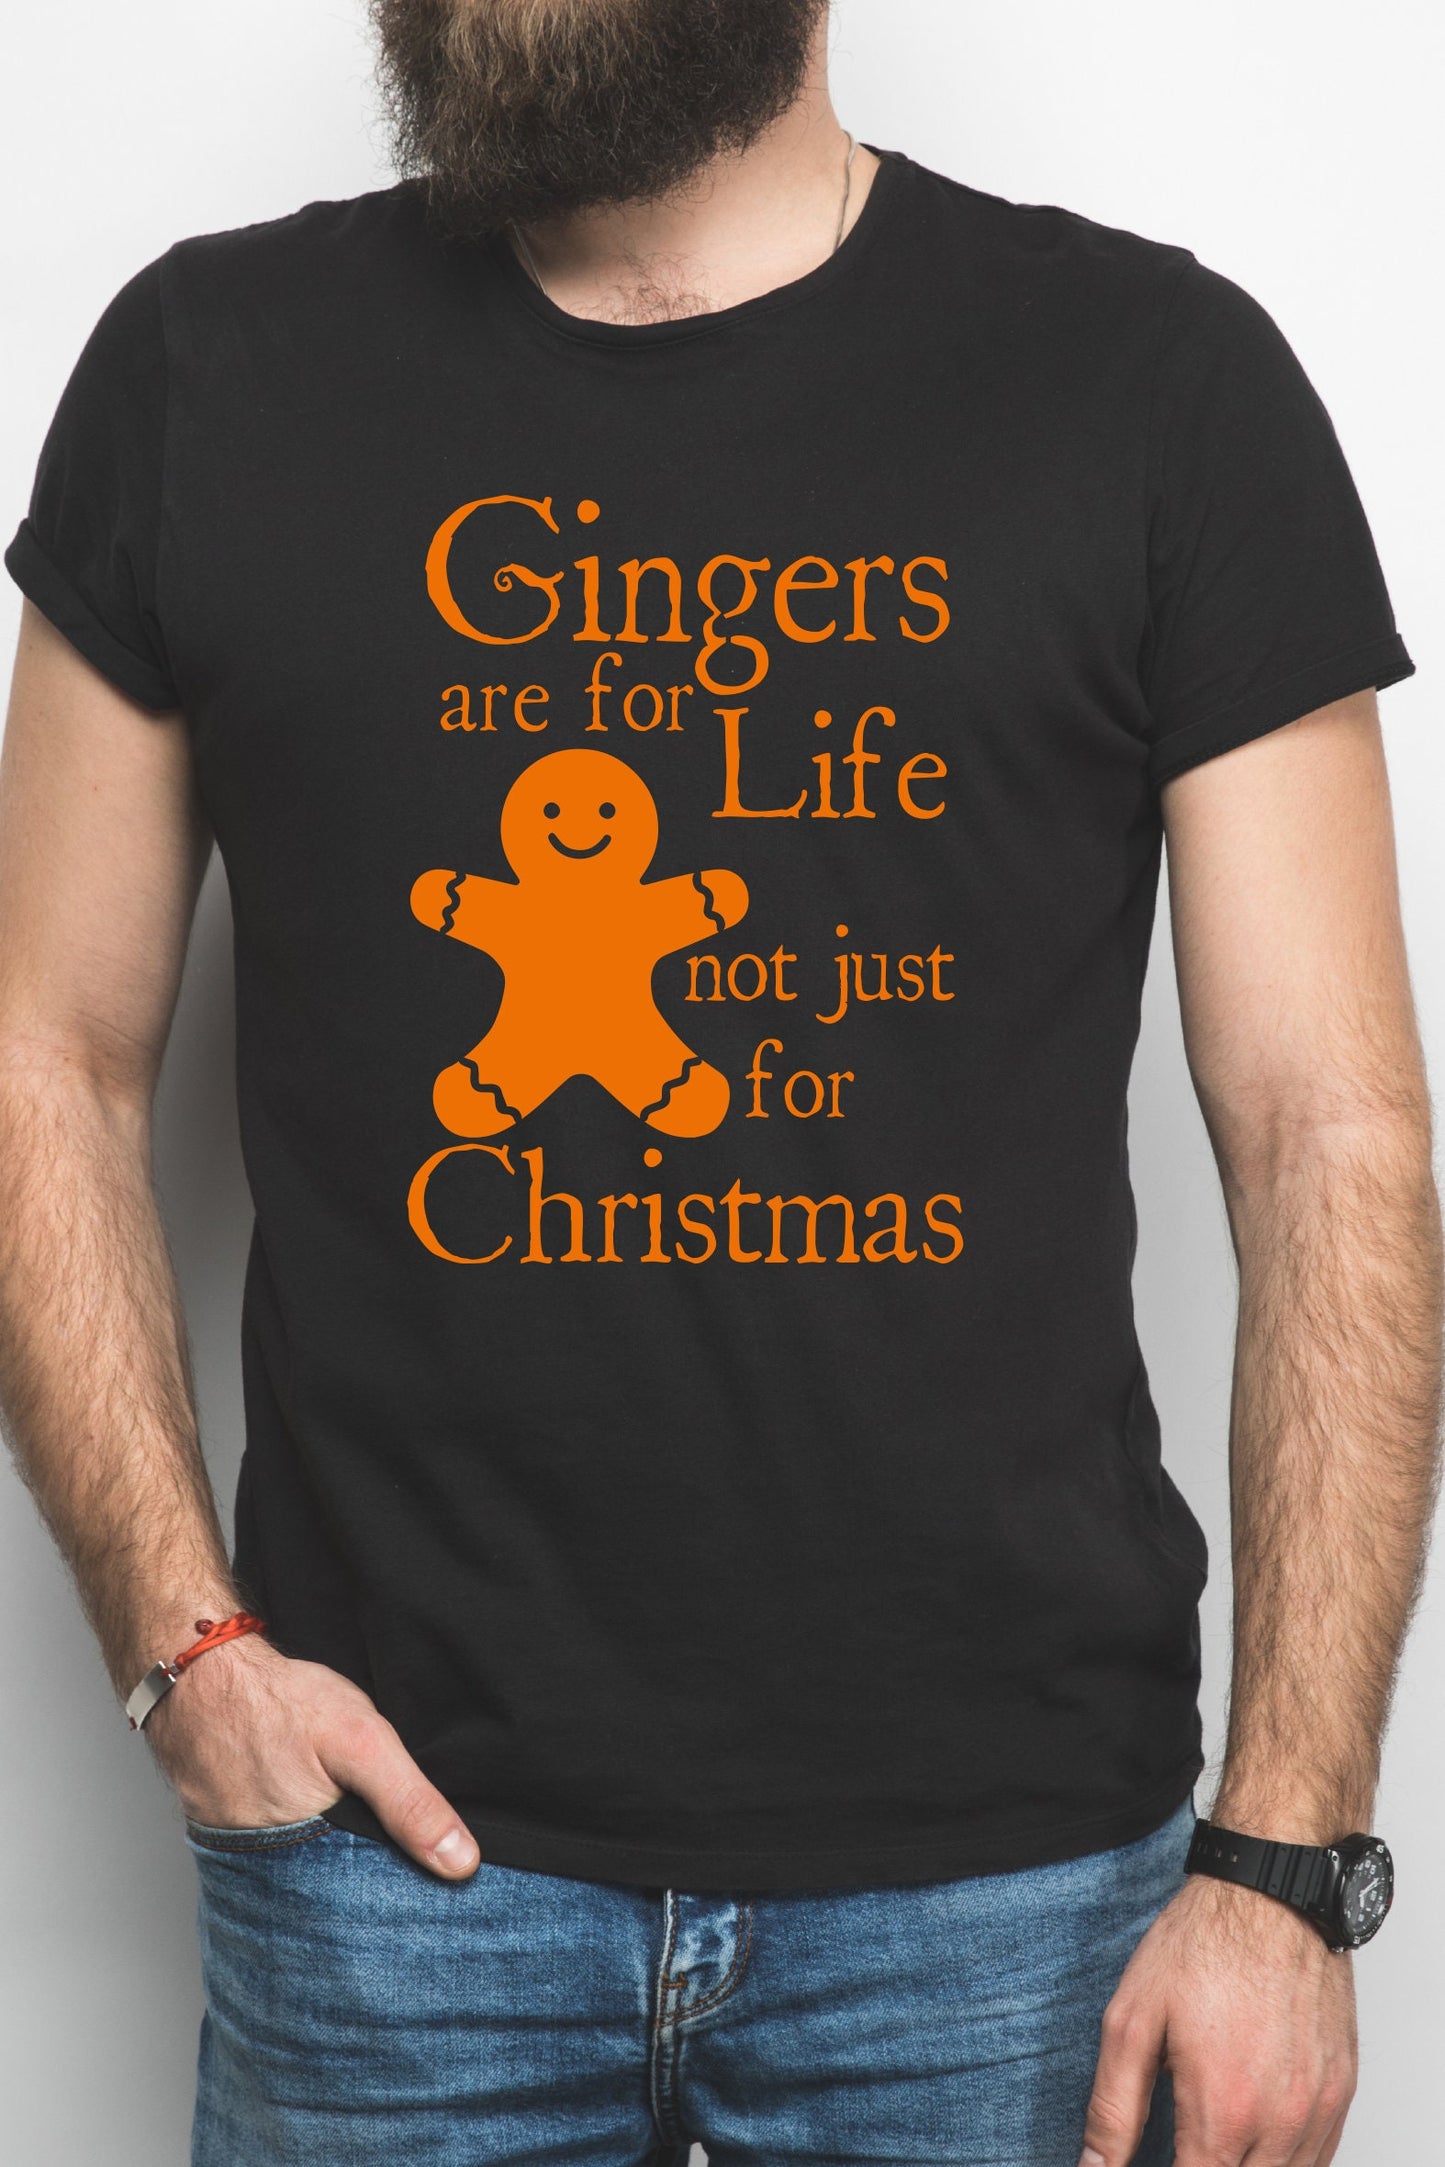 Gingers Are For Life, Not Just For Christmas T-Shirt, Cool Funny Sarcastic Xmas